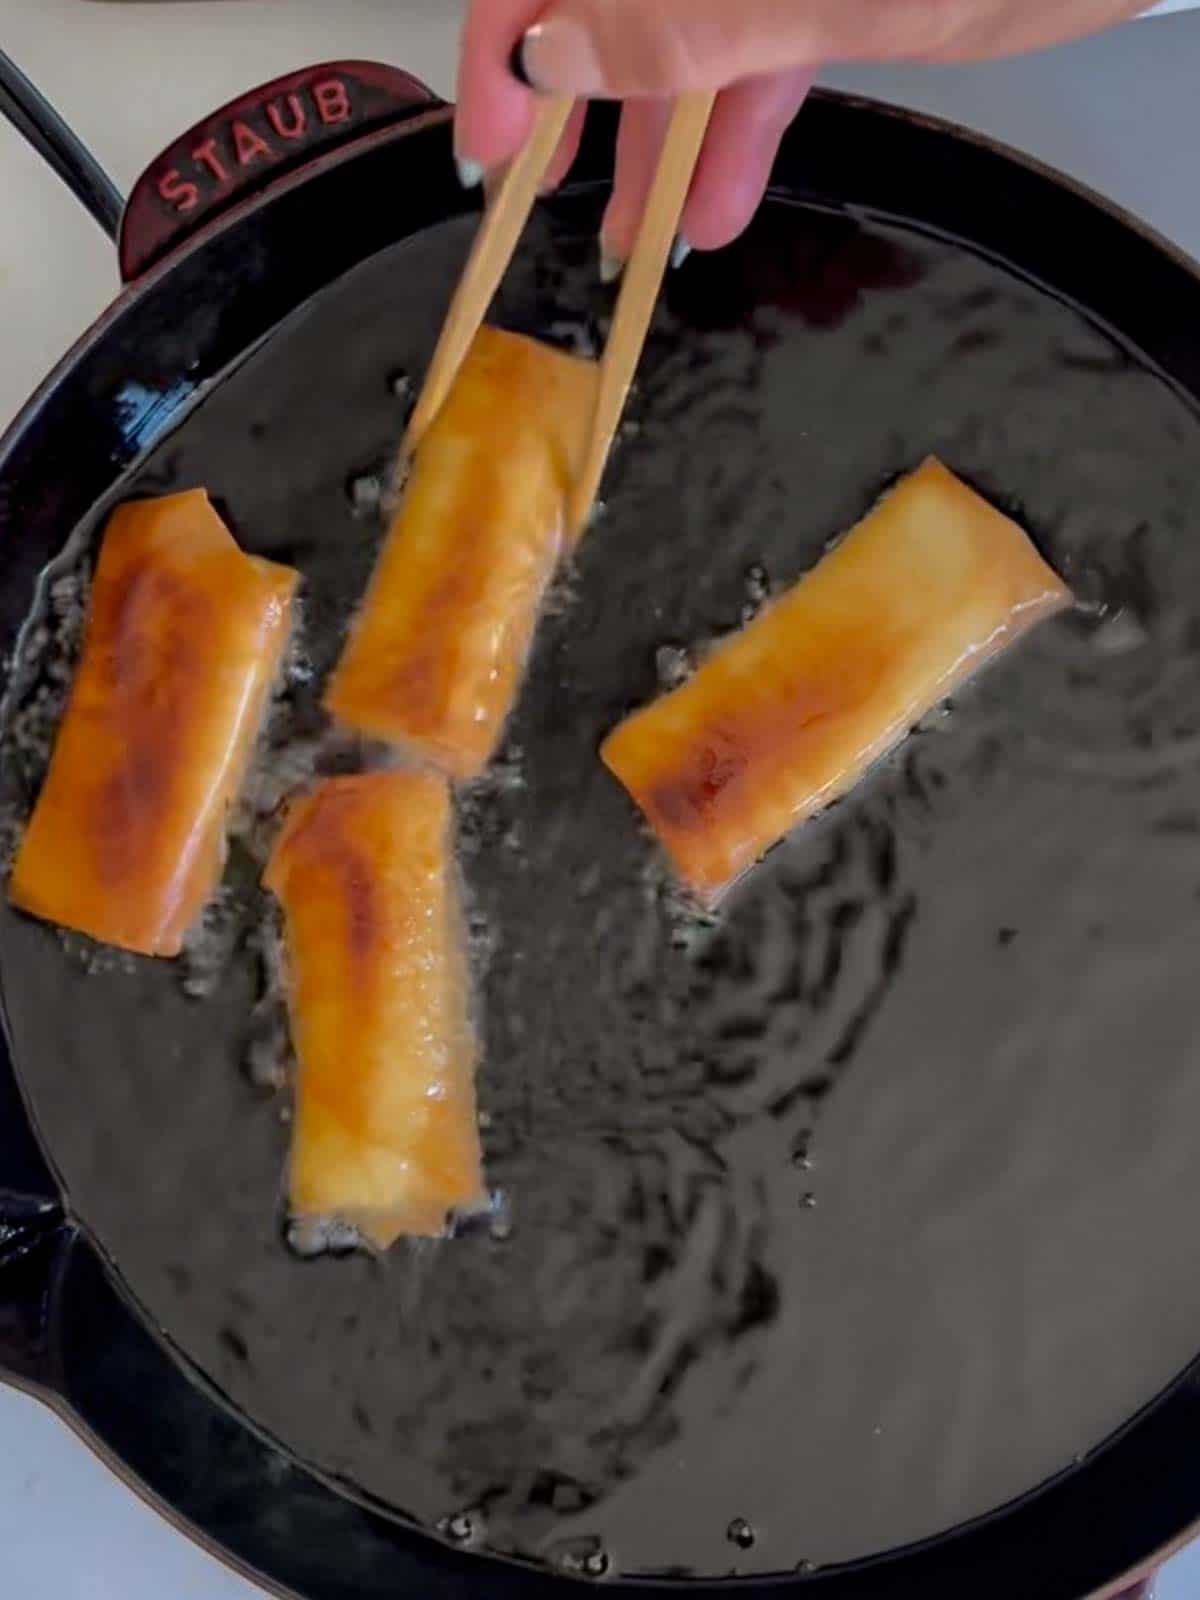 banana lumpia being fried in oil until it's golden brown